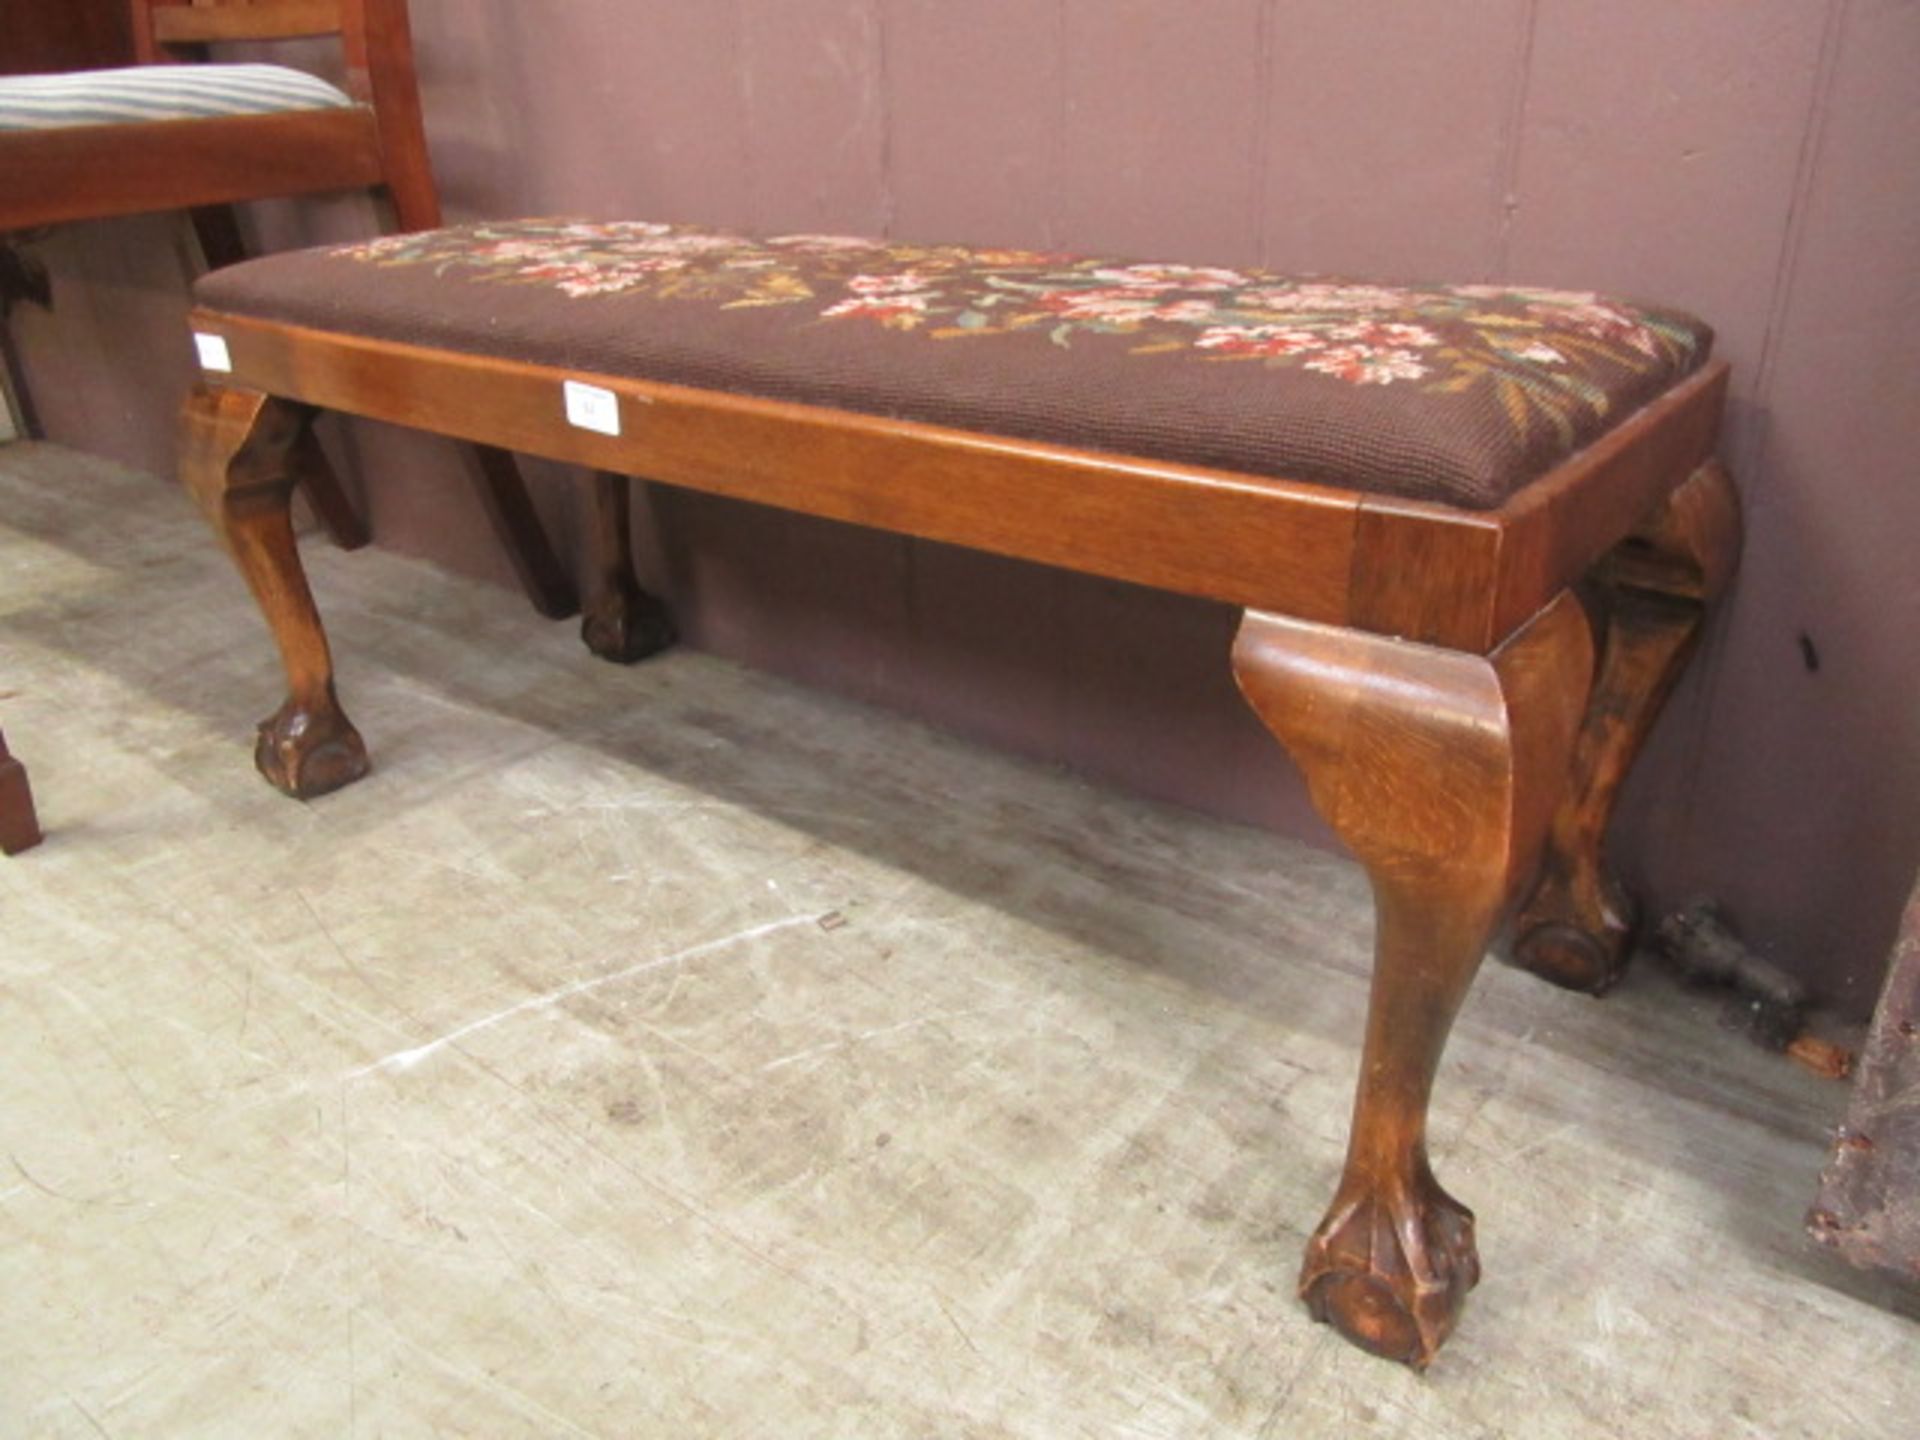 A reproduction walnut and beech stool on cabriole legs with ball and claw feet